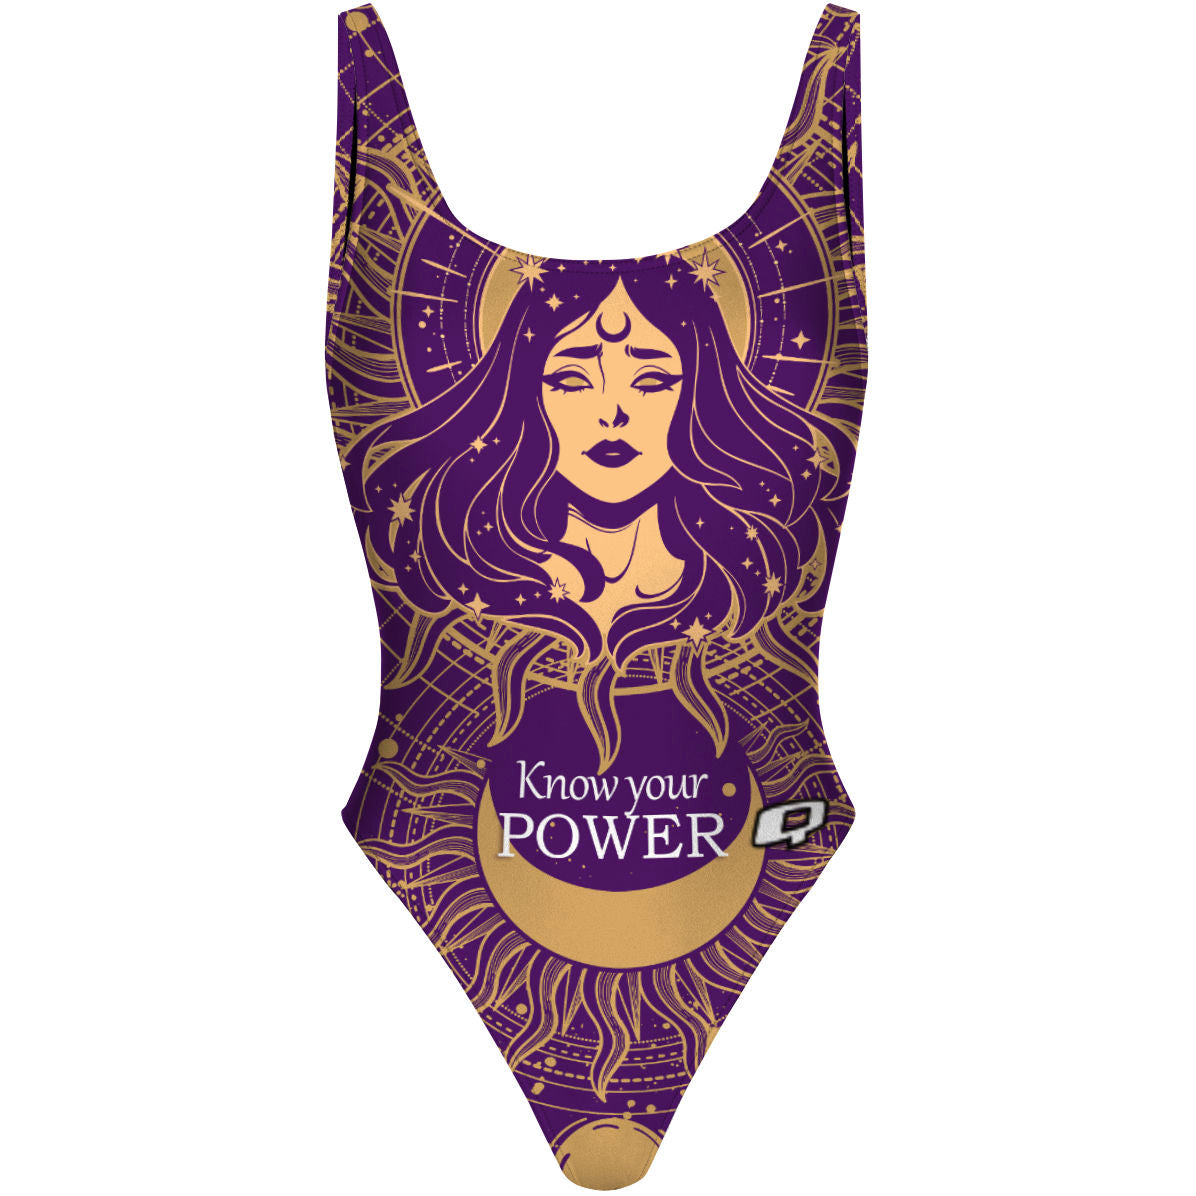 Know your power - High Hip One Piece Swimsuit